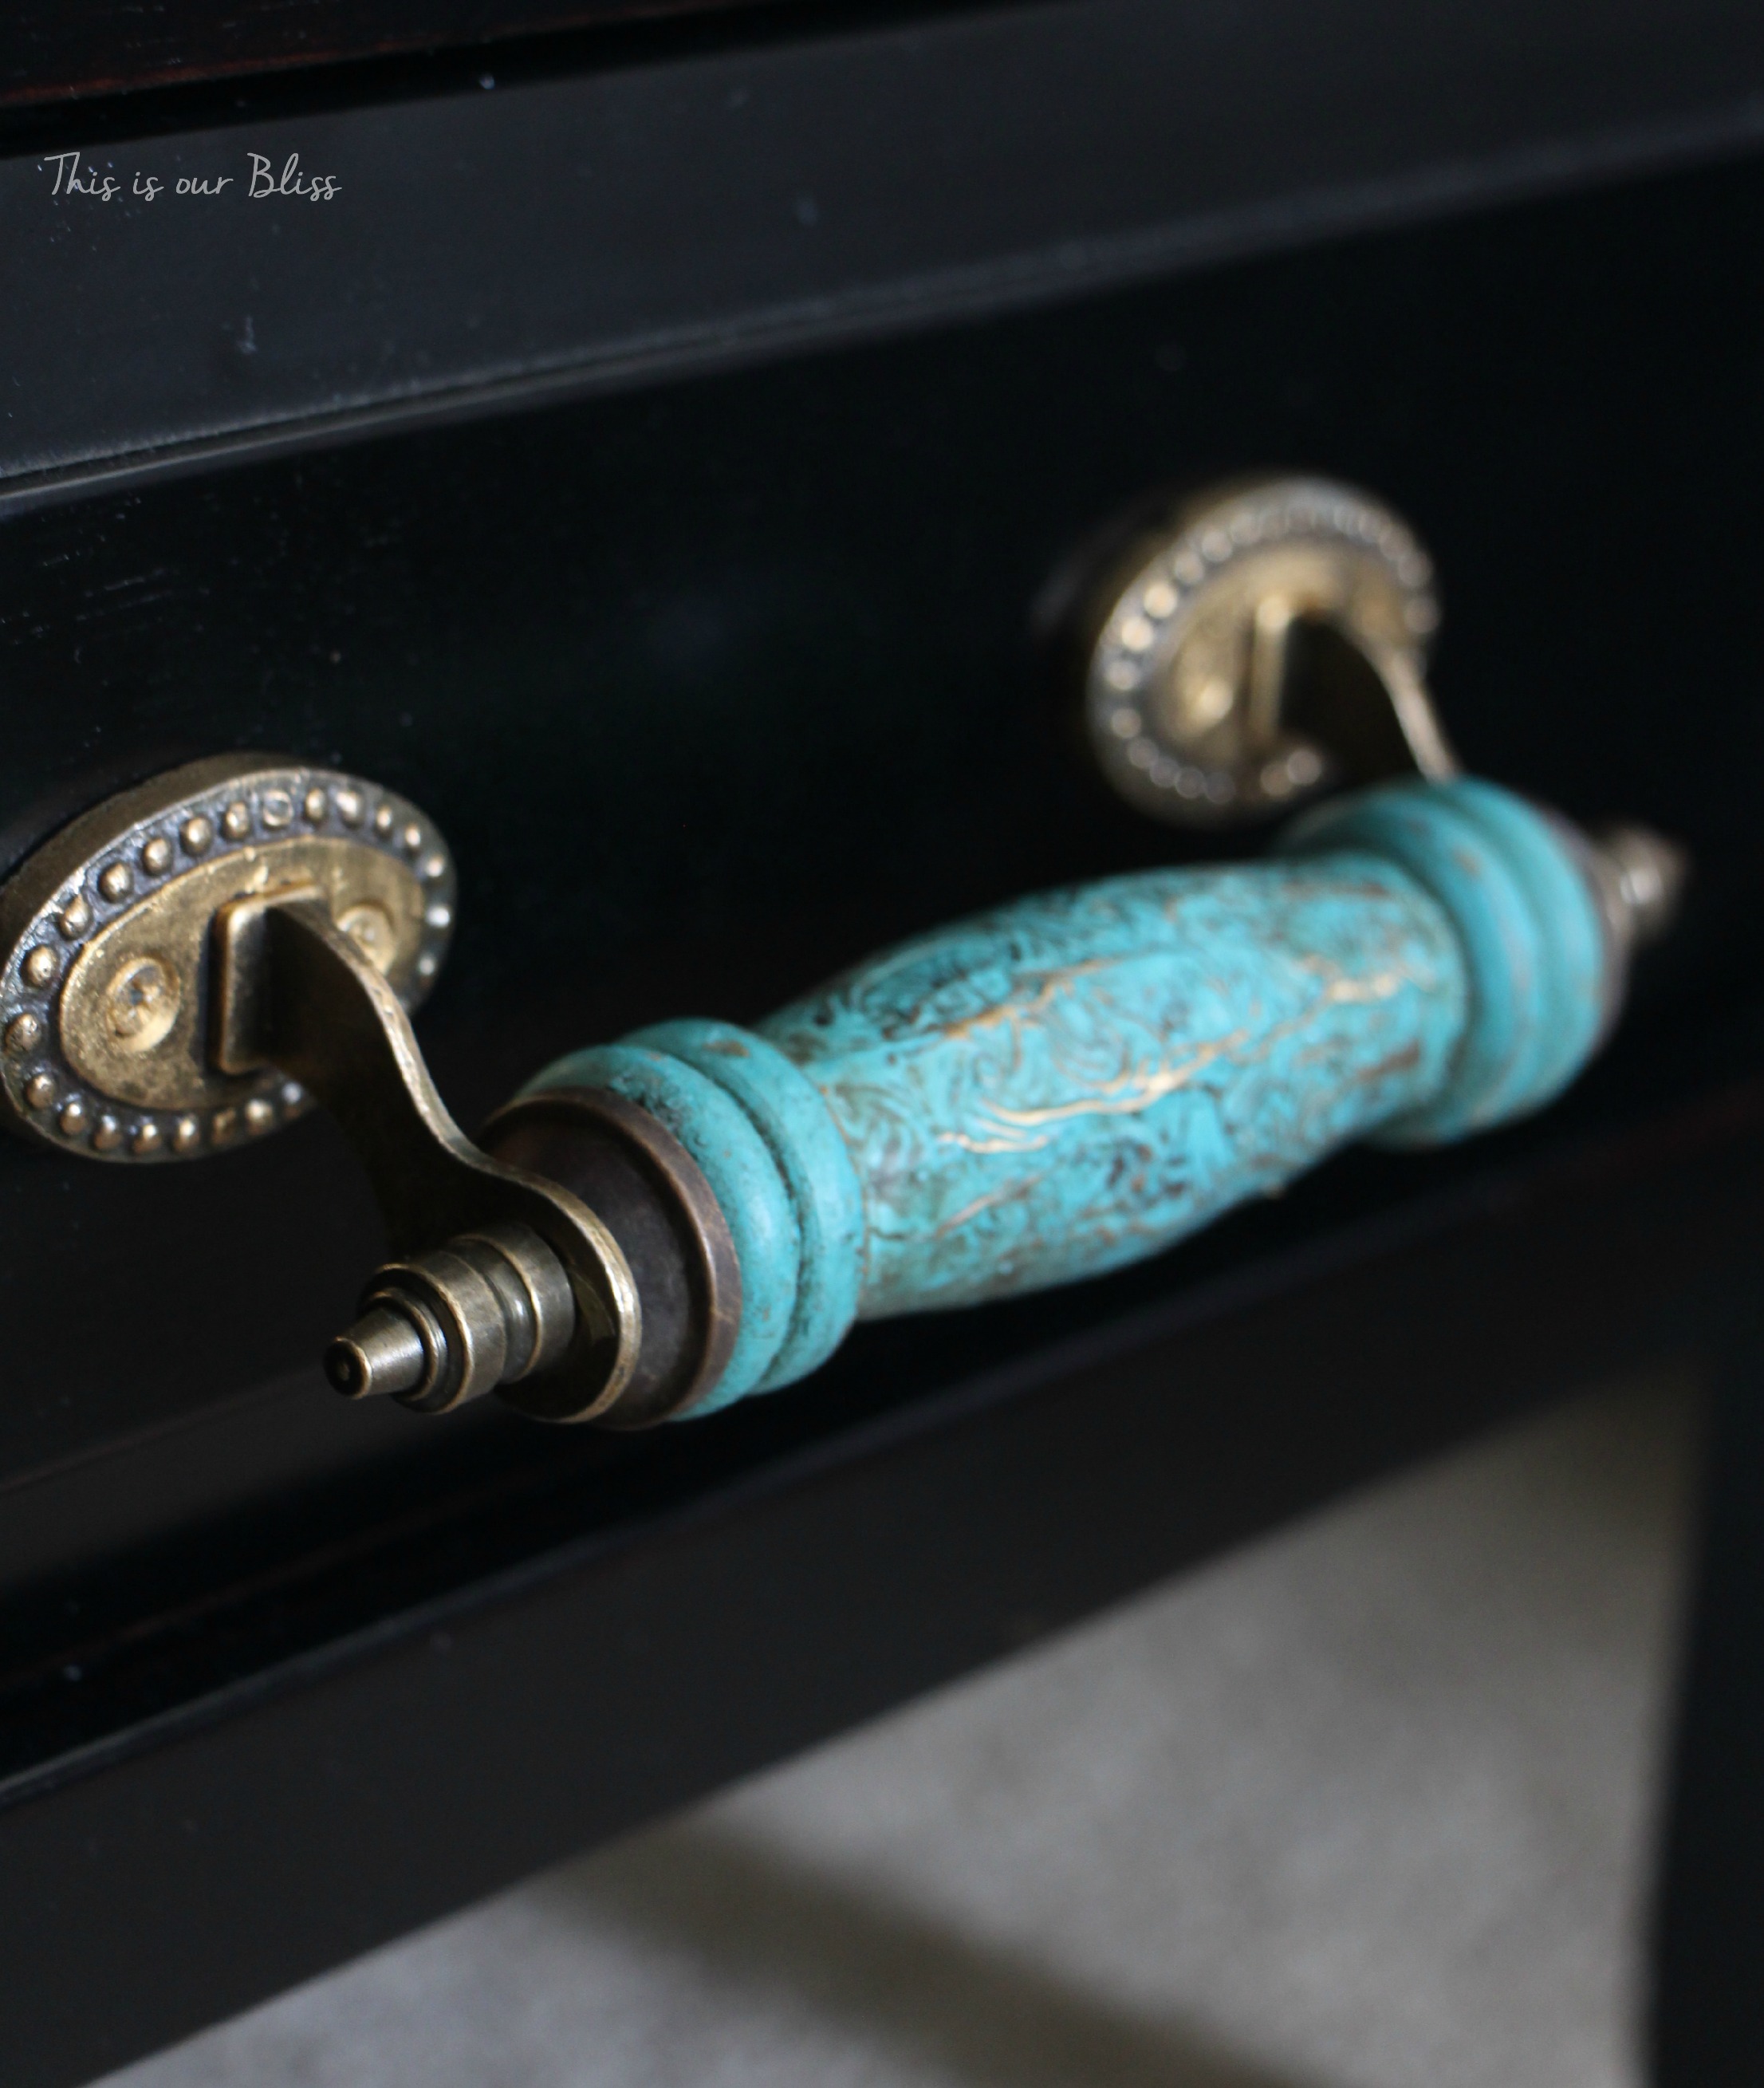 bedside table pulls - Guestroom revamp - one room challenge - this is our bliss